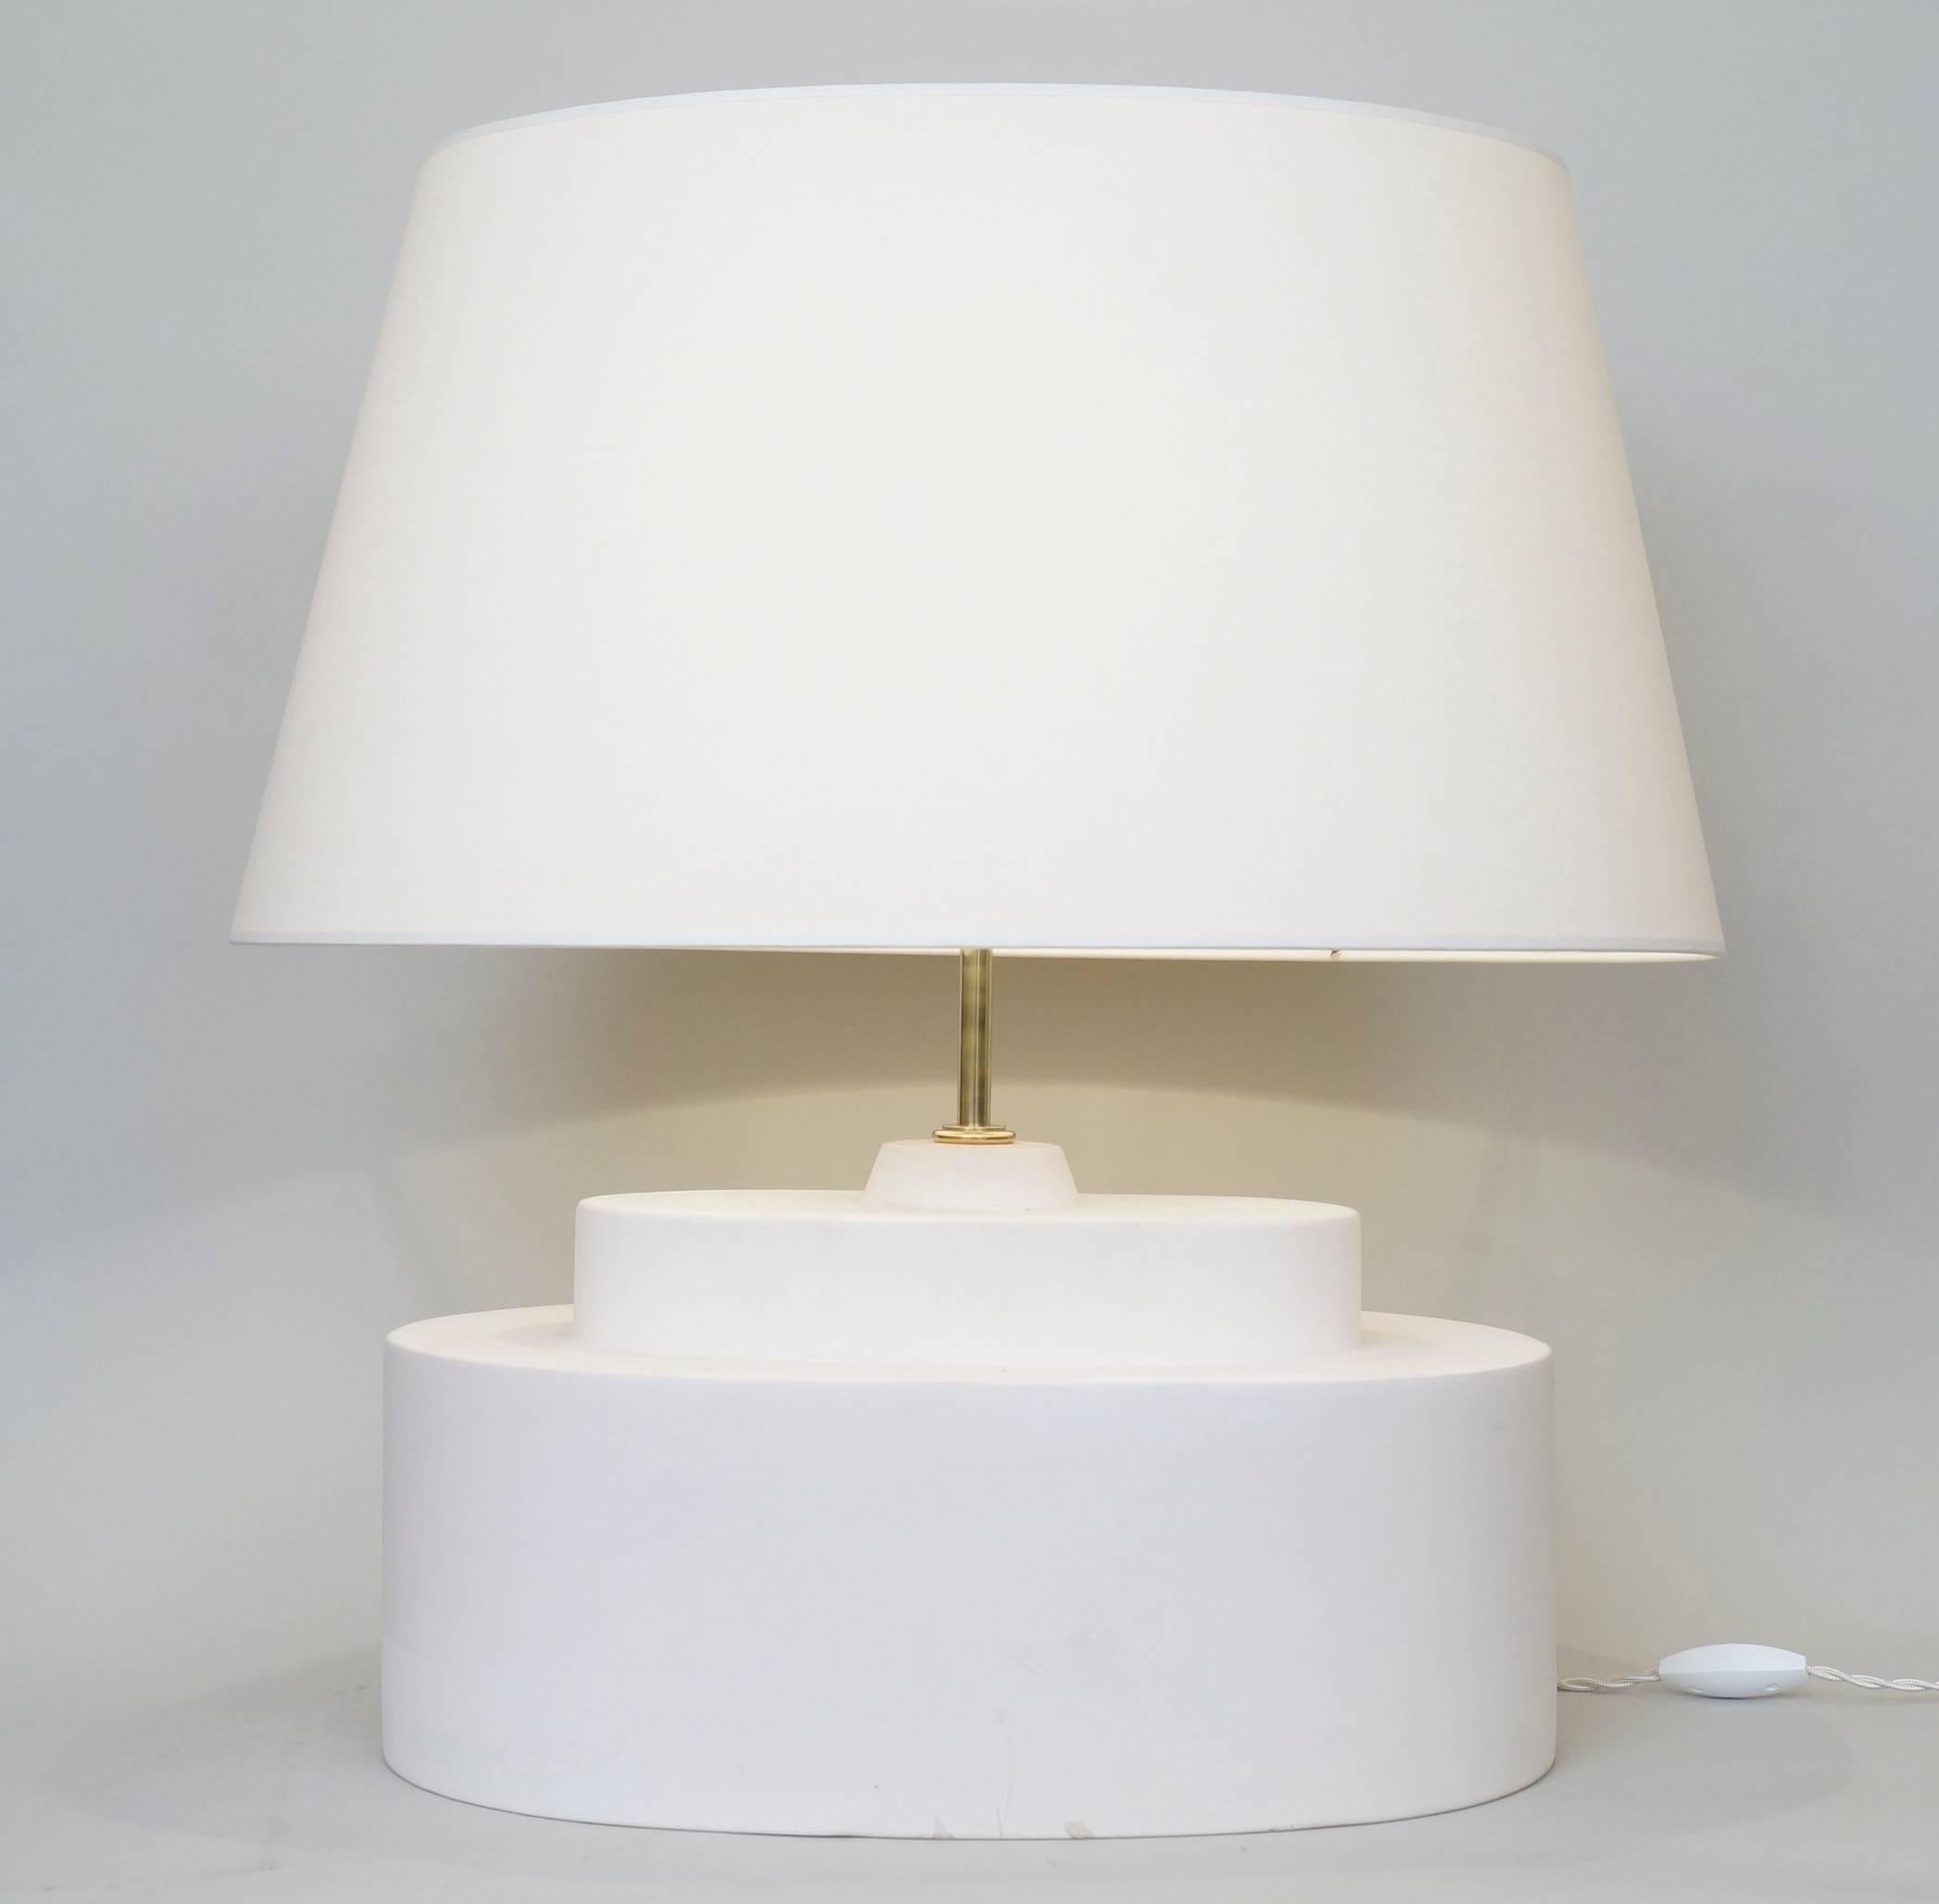 Un-enamelled white ceramic table lamp, ceramic factory of Desvres custom-made fabric lampshade, rewired with twisted silk cord.
US standard plug on request.
Ceramic body height: 22 cm - 8,7 in.
Height with lampshade: 55 cm - 21,7 in.